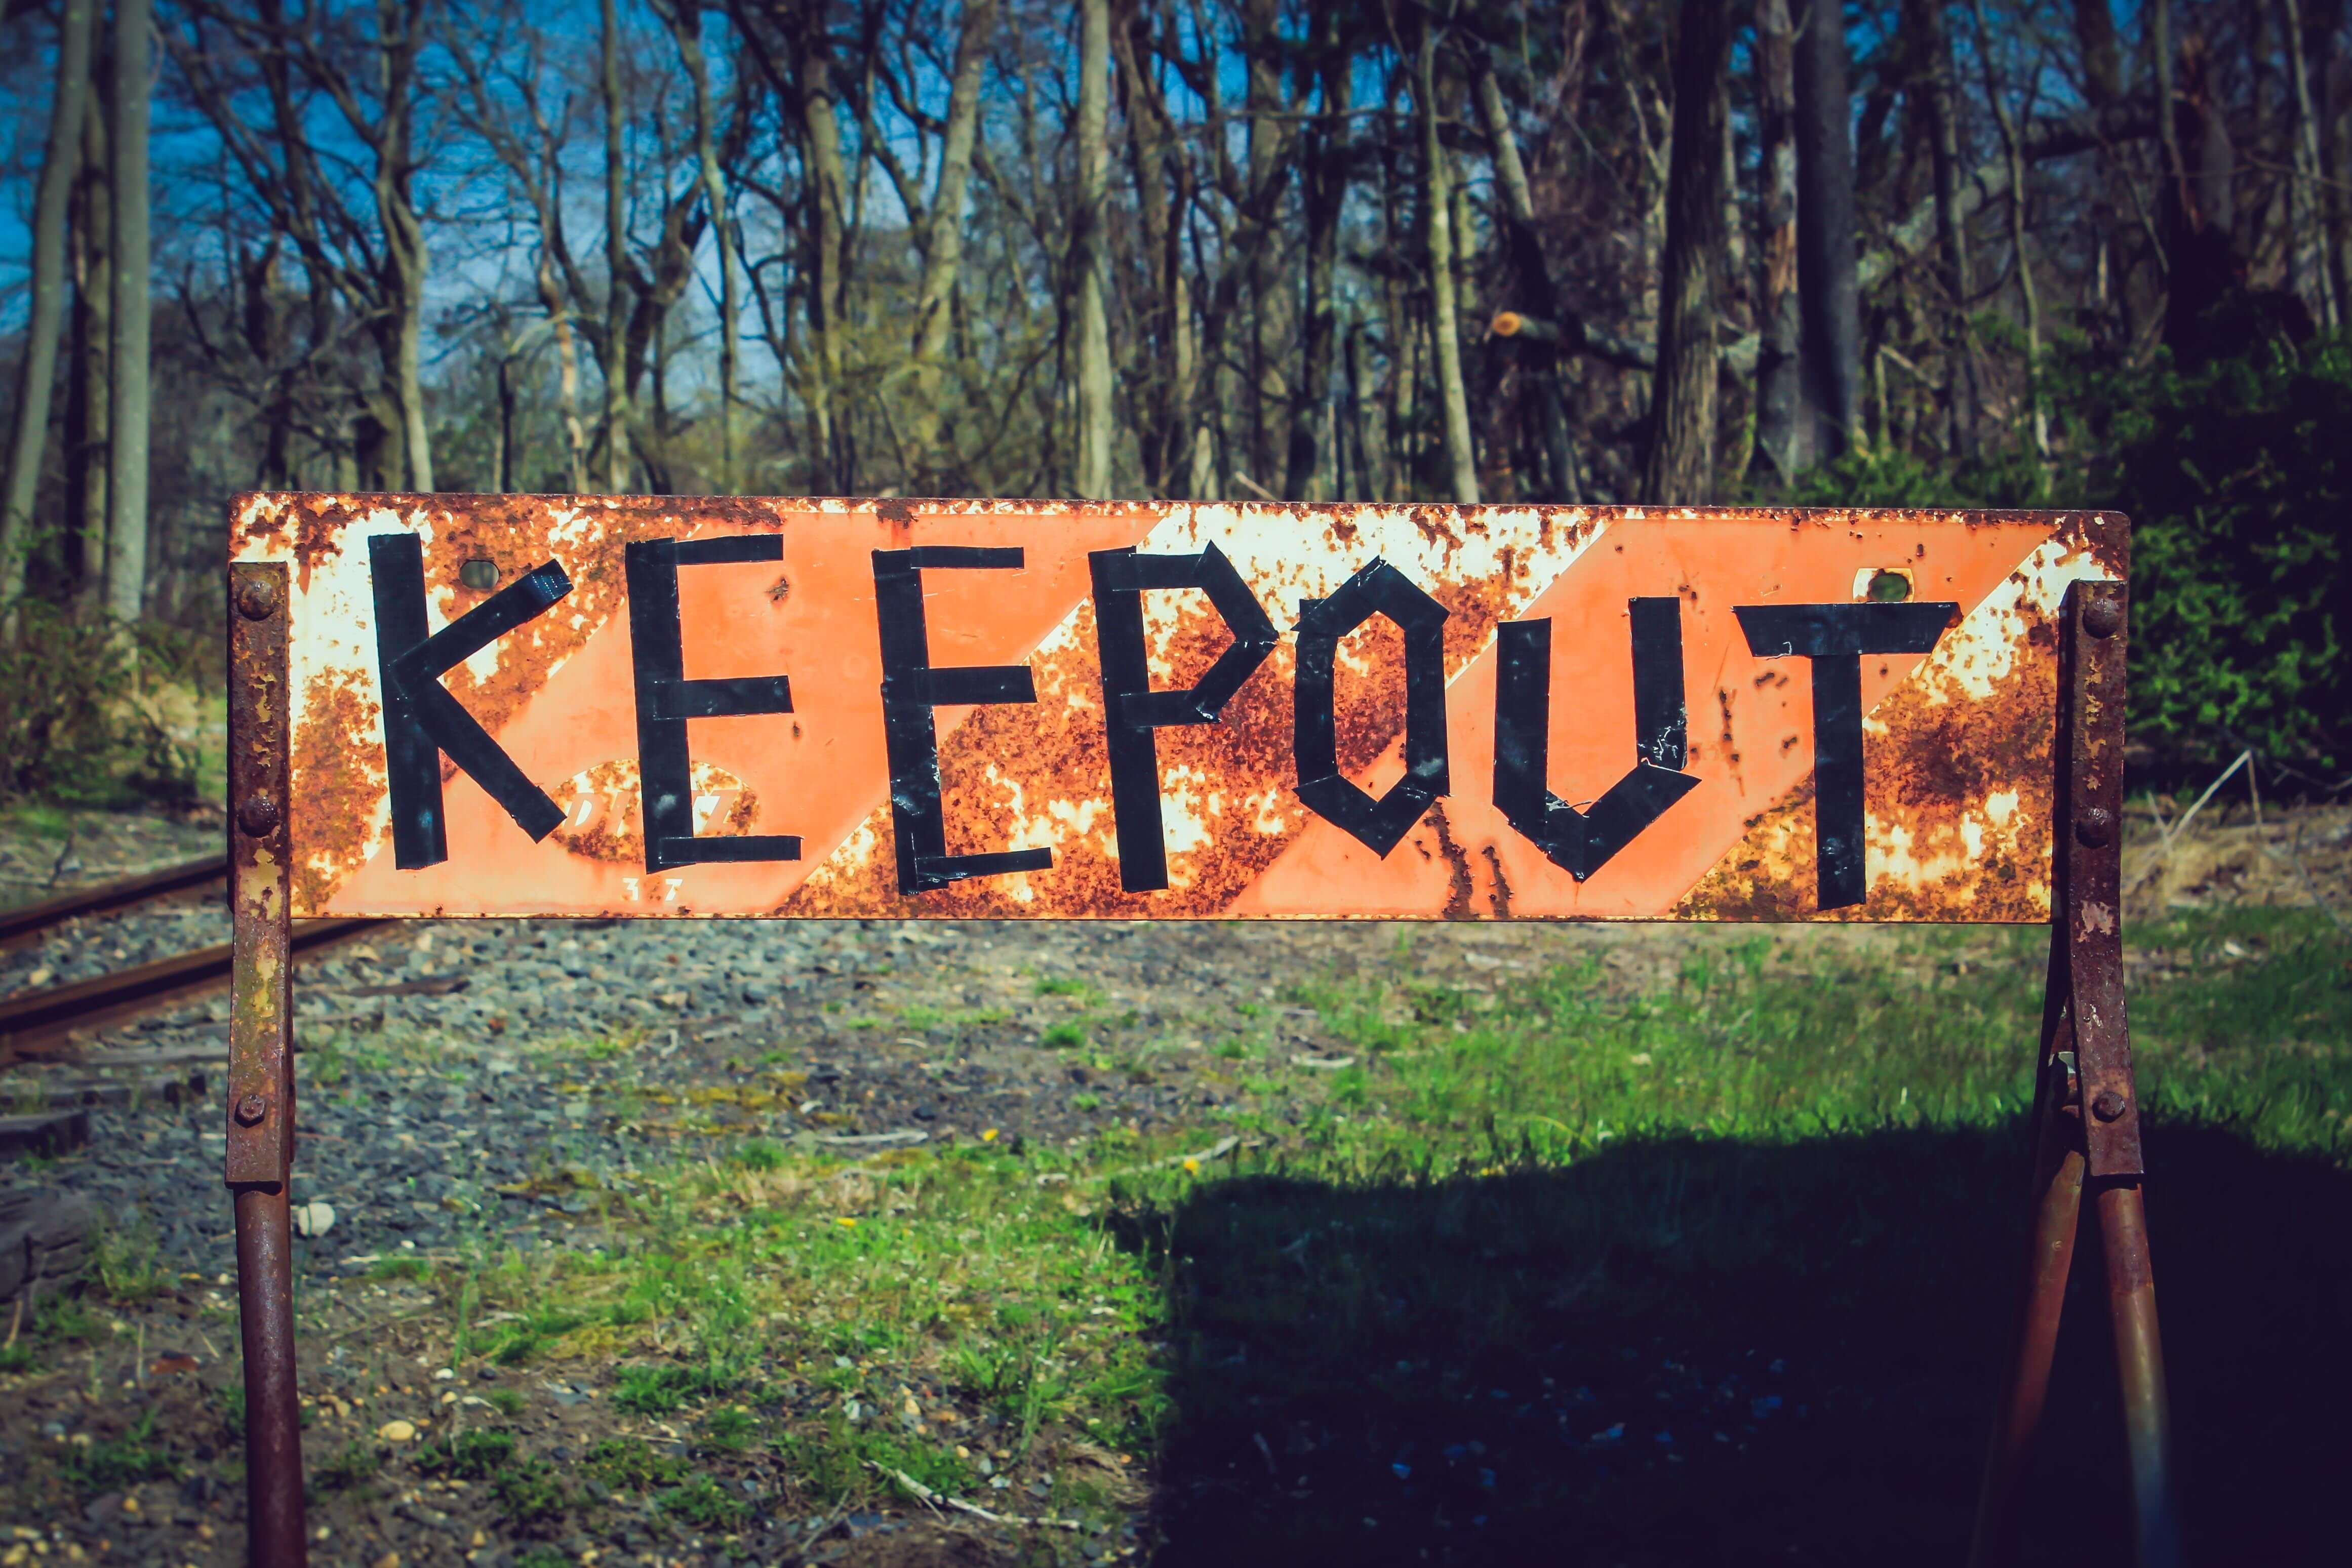 keepout